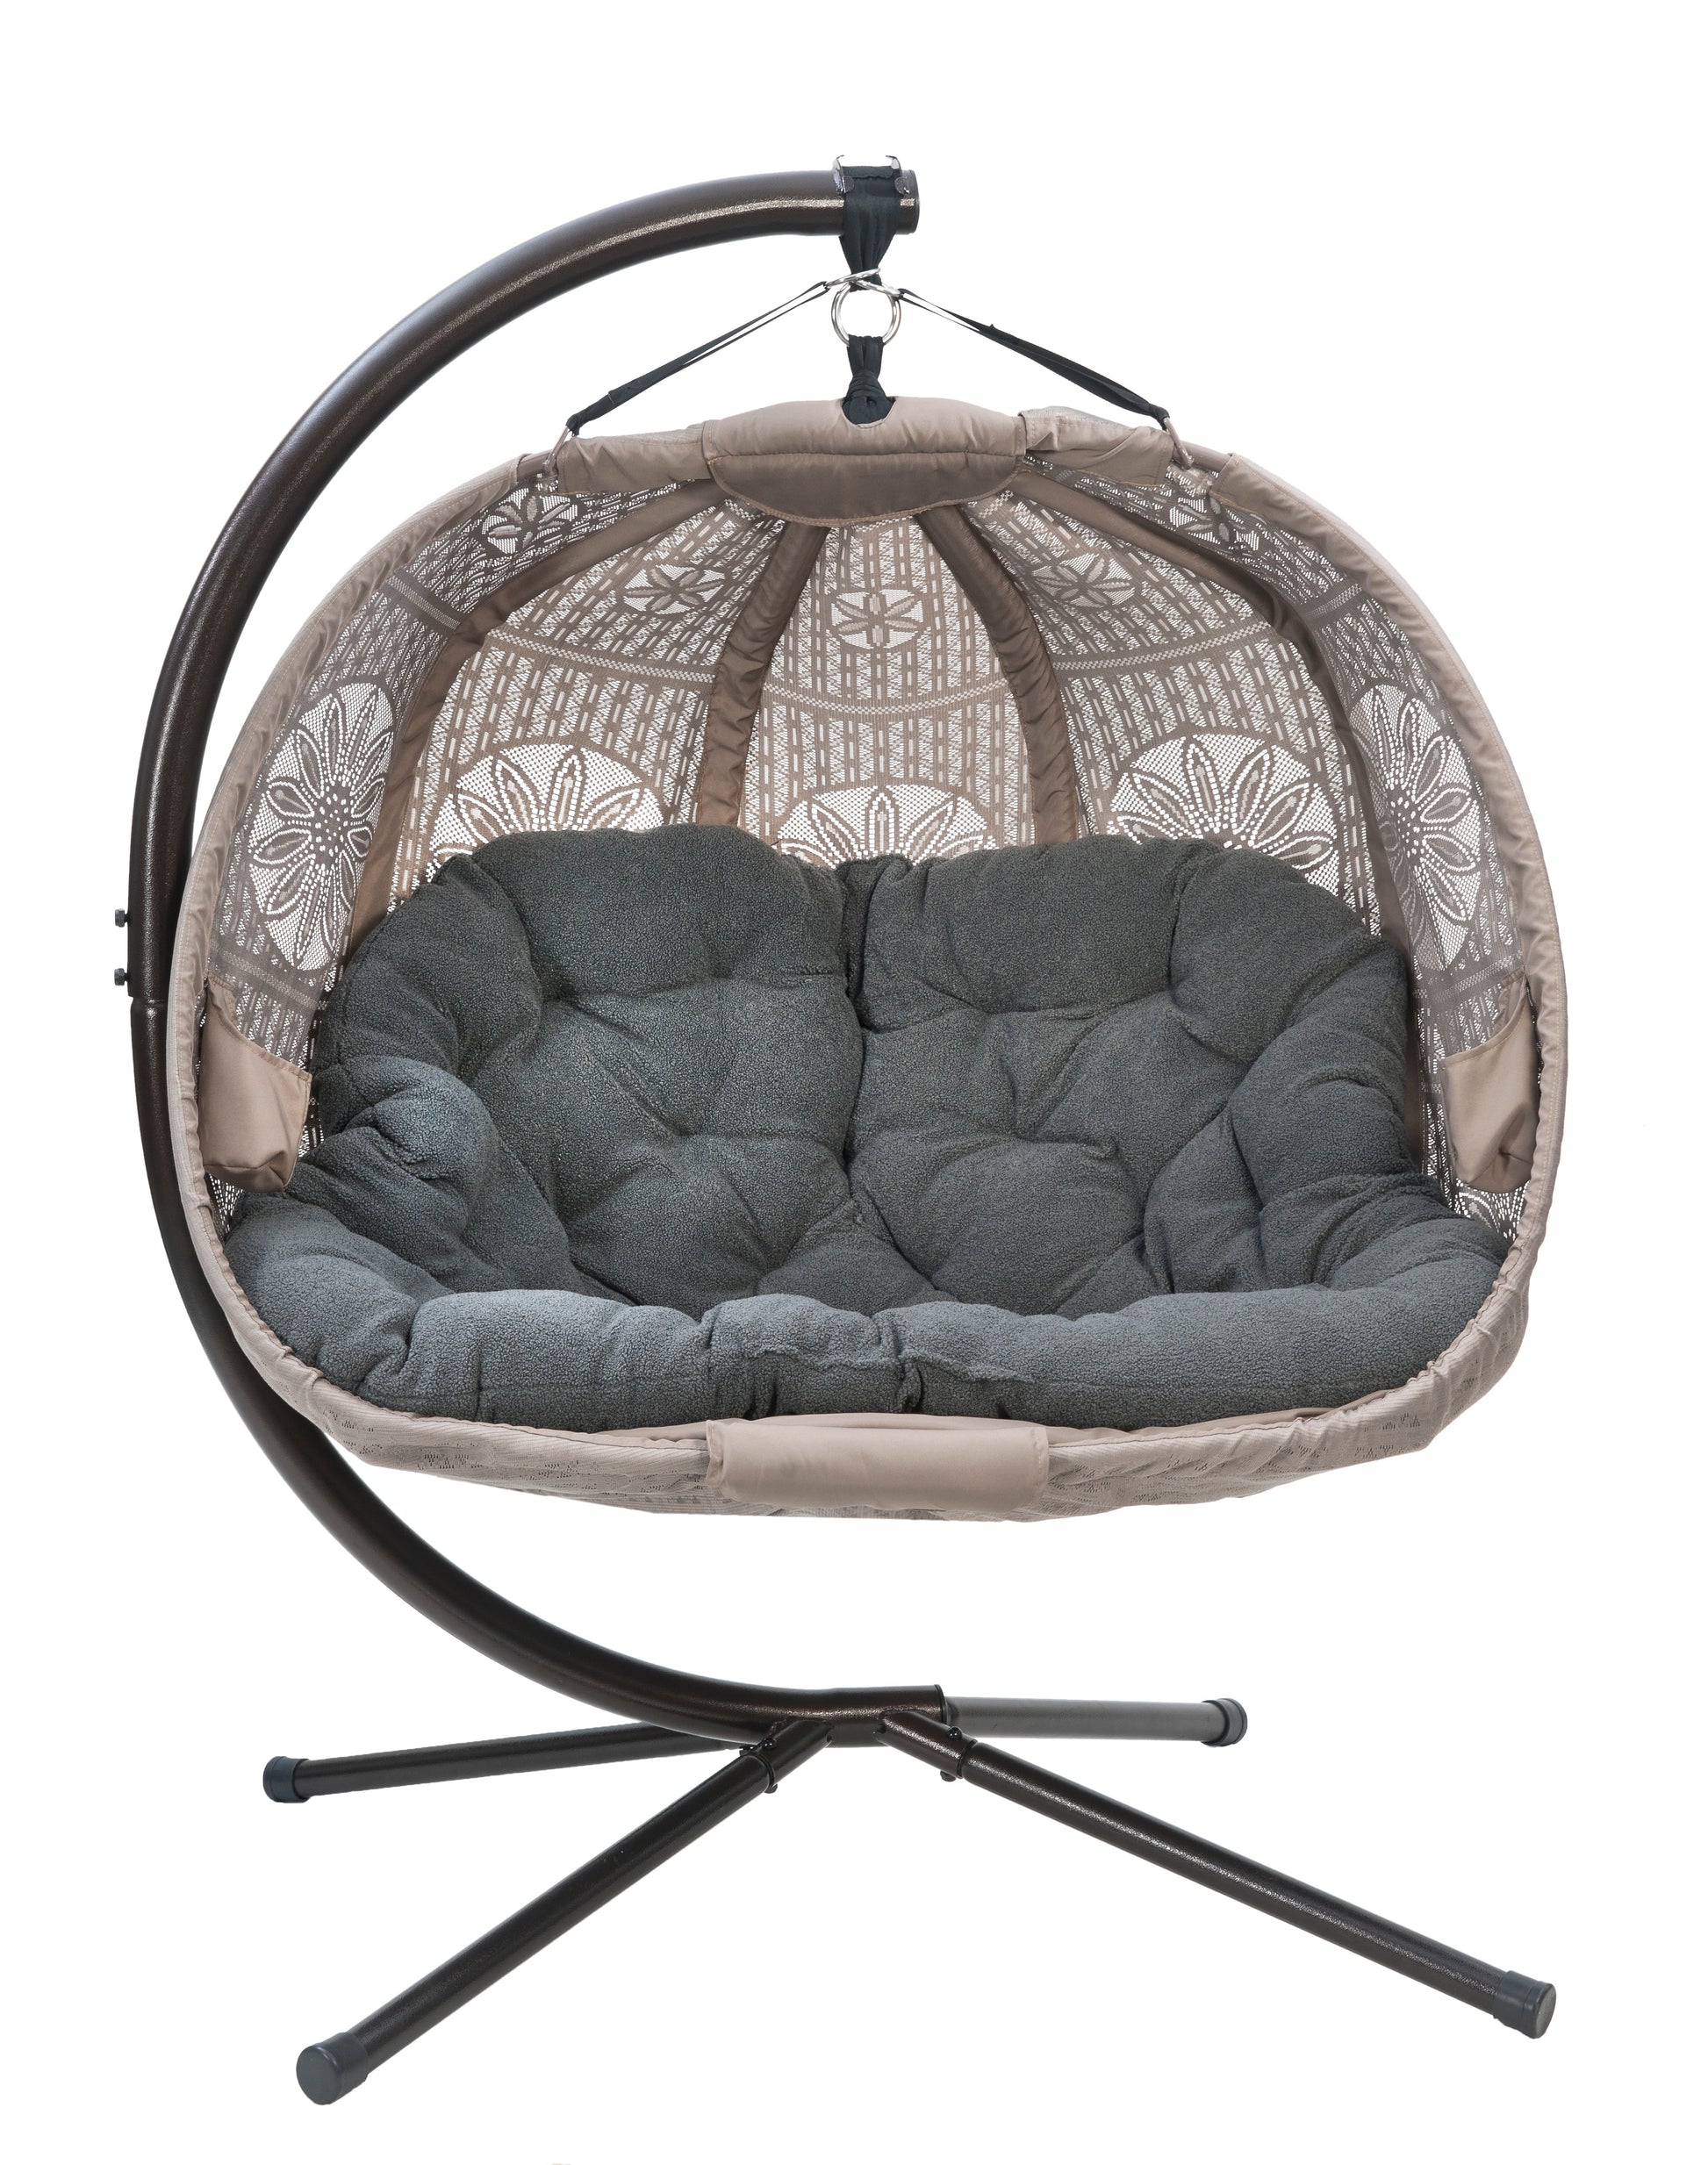 FlowerHouse Hanging Pumpkin Patio Loveseat Chair with stand-Dream Catcher - front view